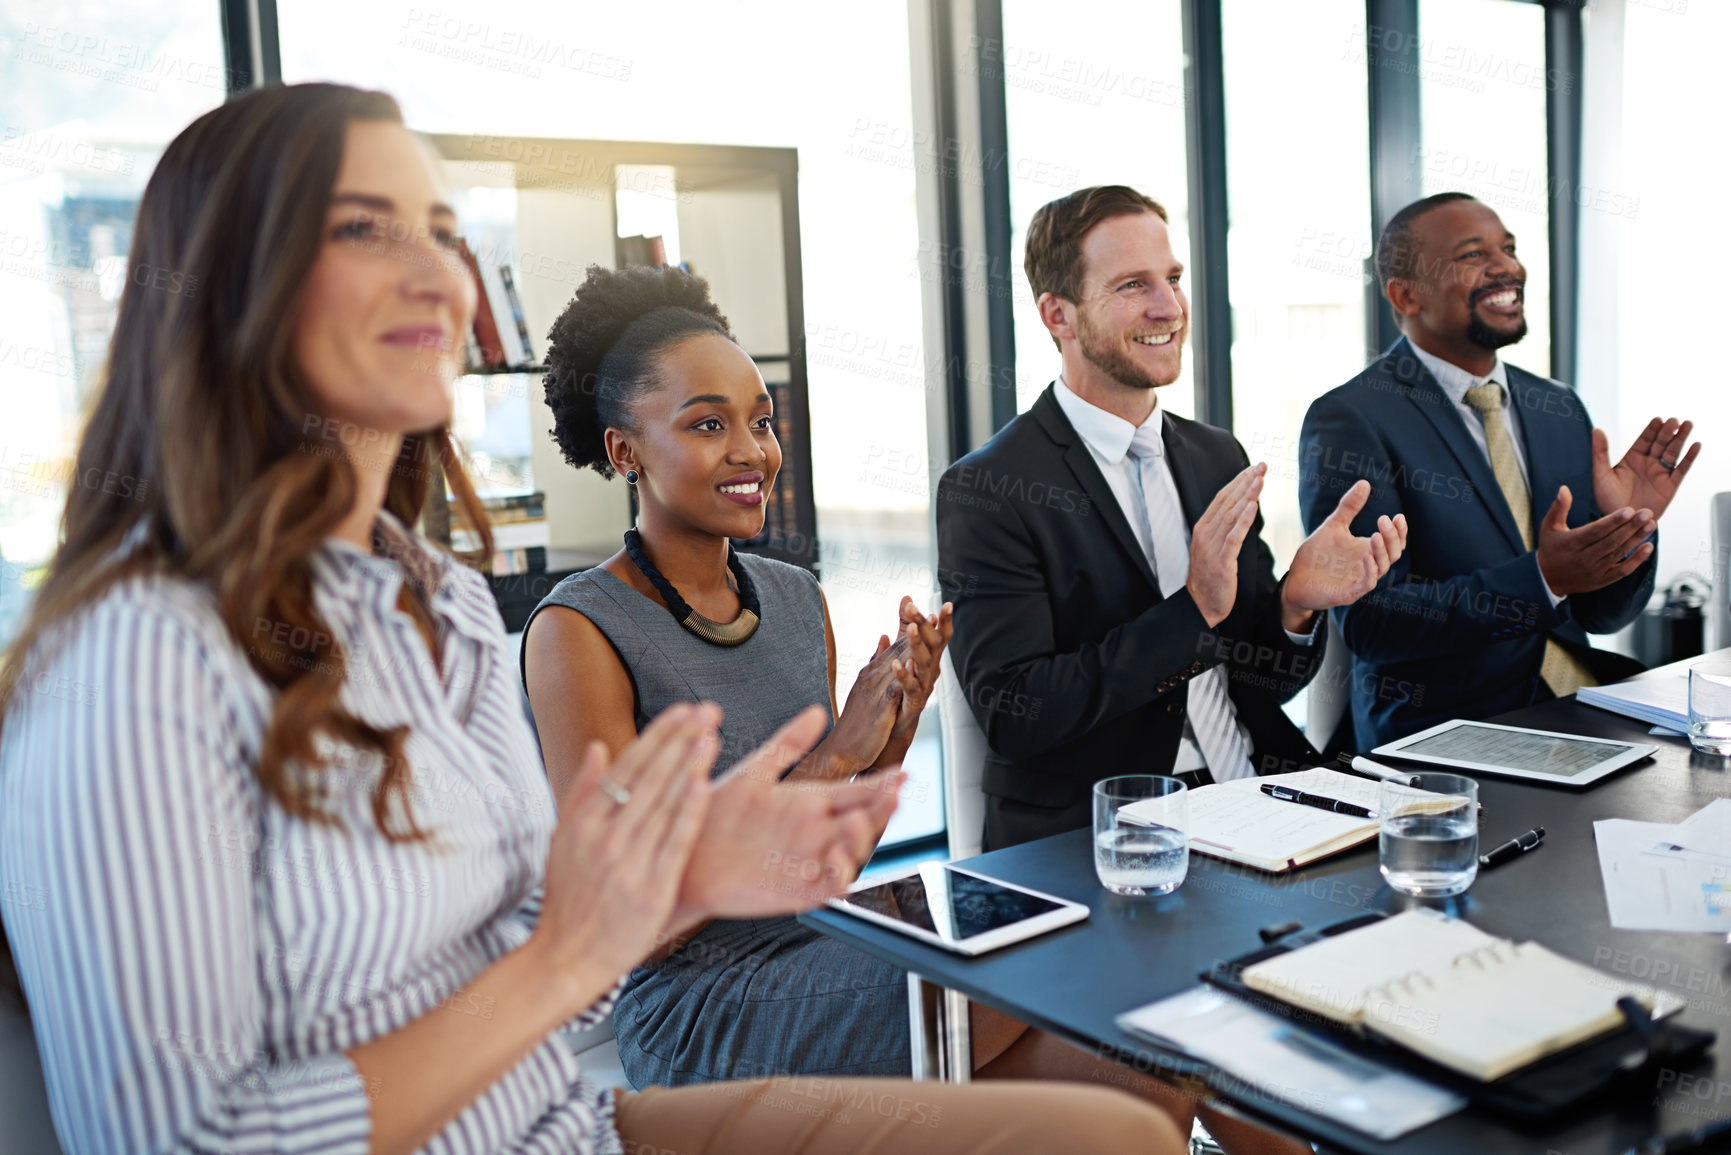 Buy stock photo Applause, diversity and business people at presentation in office for corporate finance seminar or workshop. Happy, teamwork and group of financial advisors clapping hands for conference or meeting.